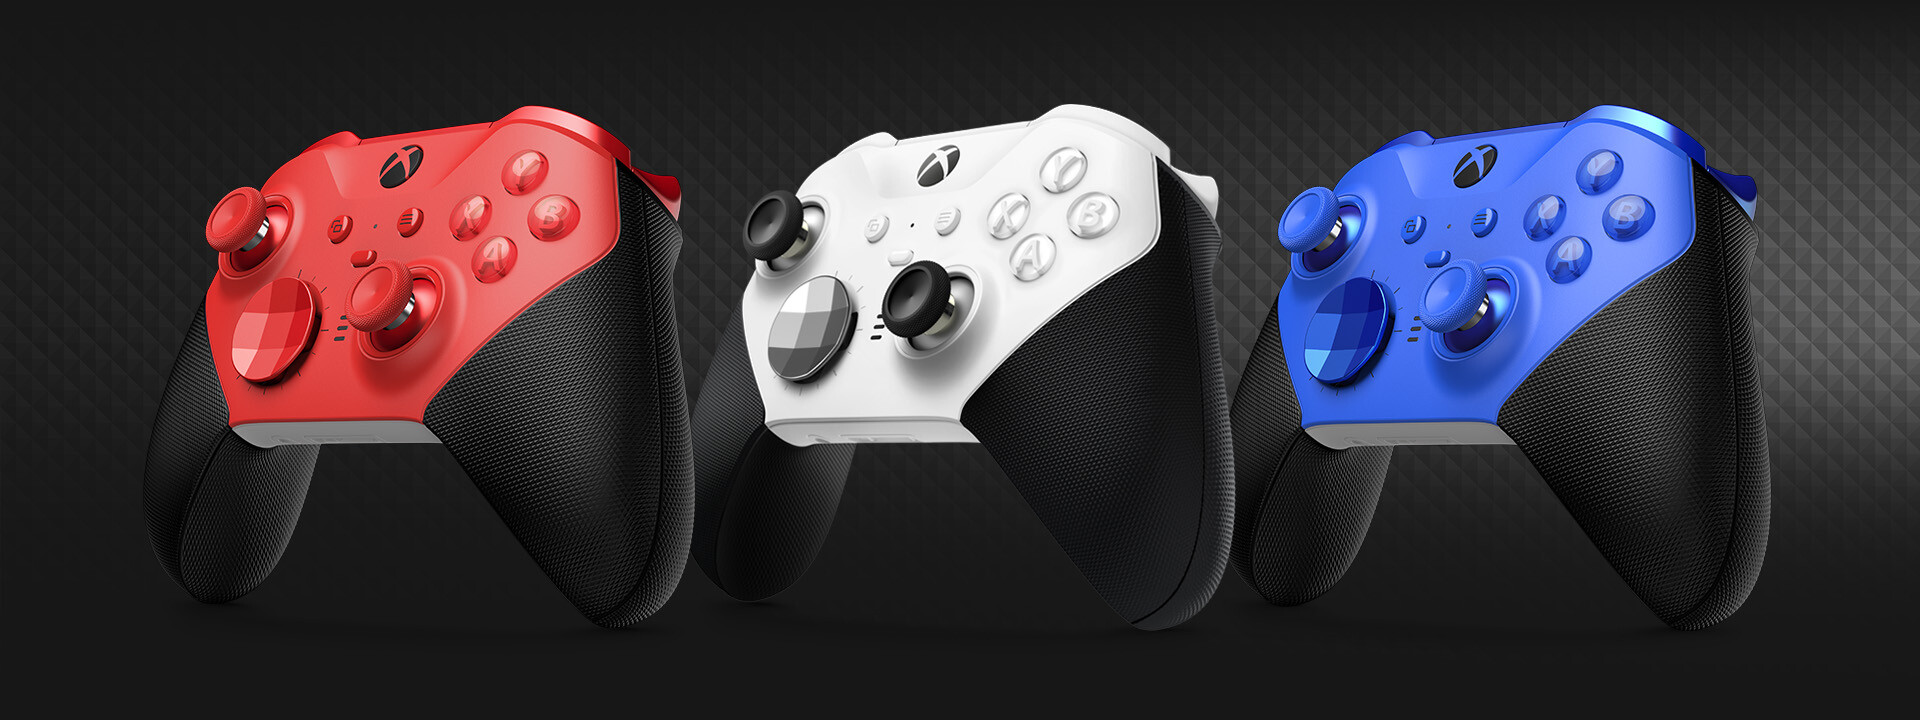 Xbox Elite Wireless Controller Series 2 Core Now Available in Vibrant Red  or Blue | TechPowerUp